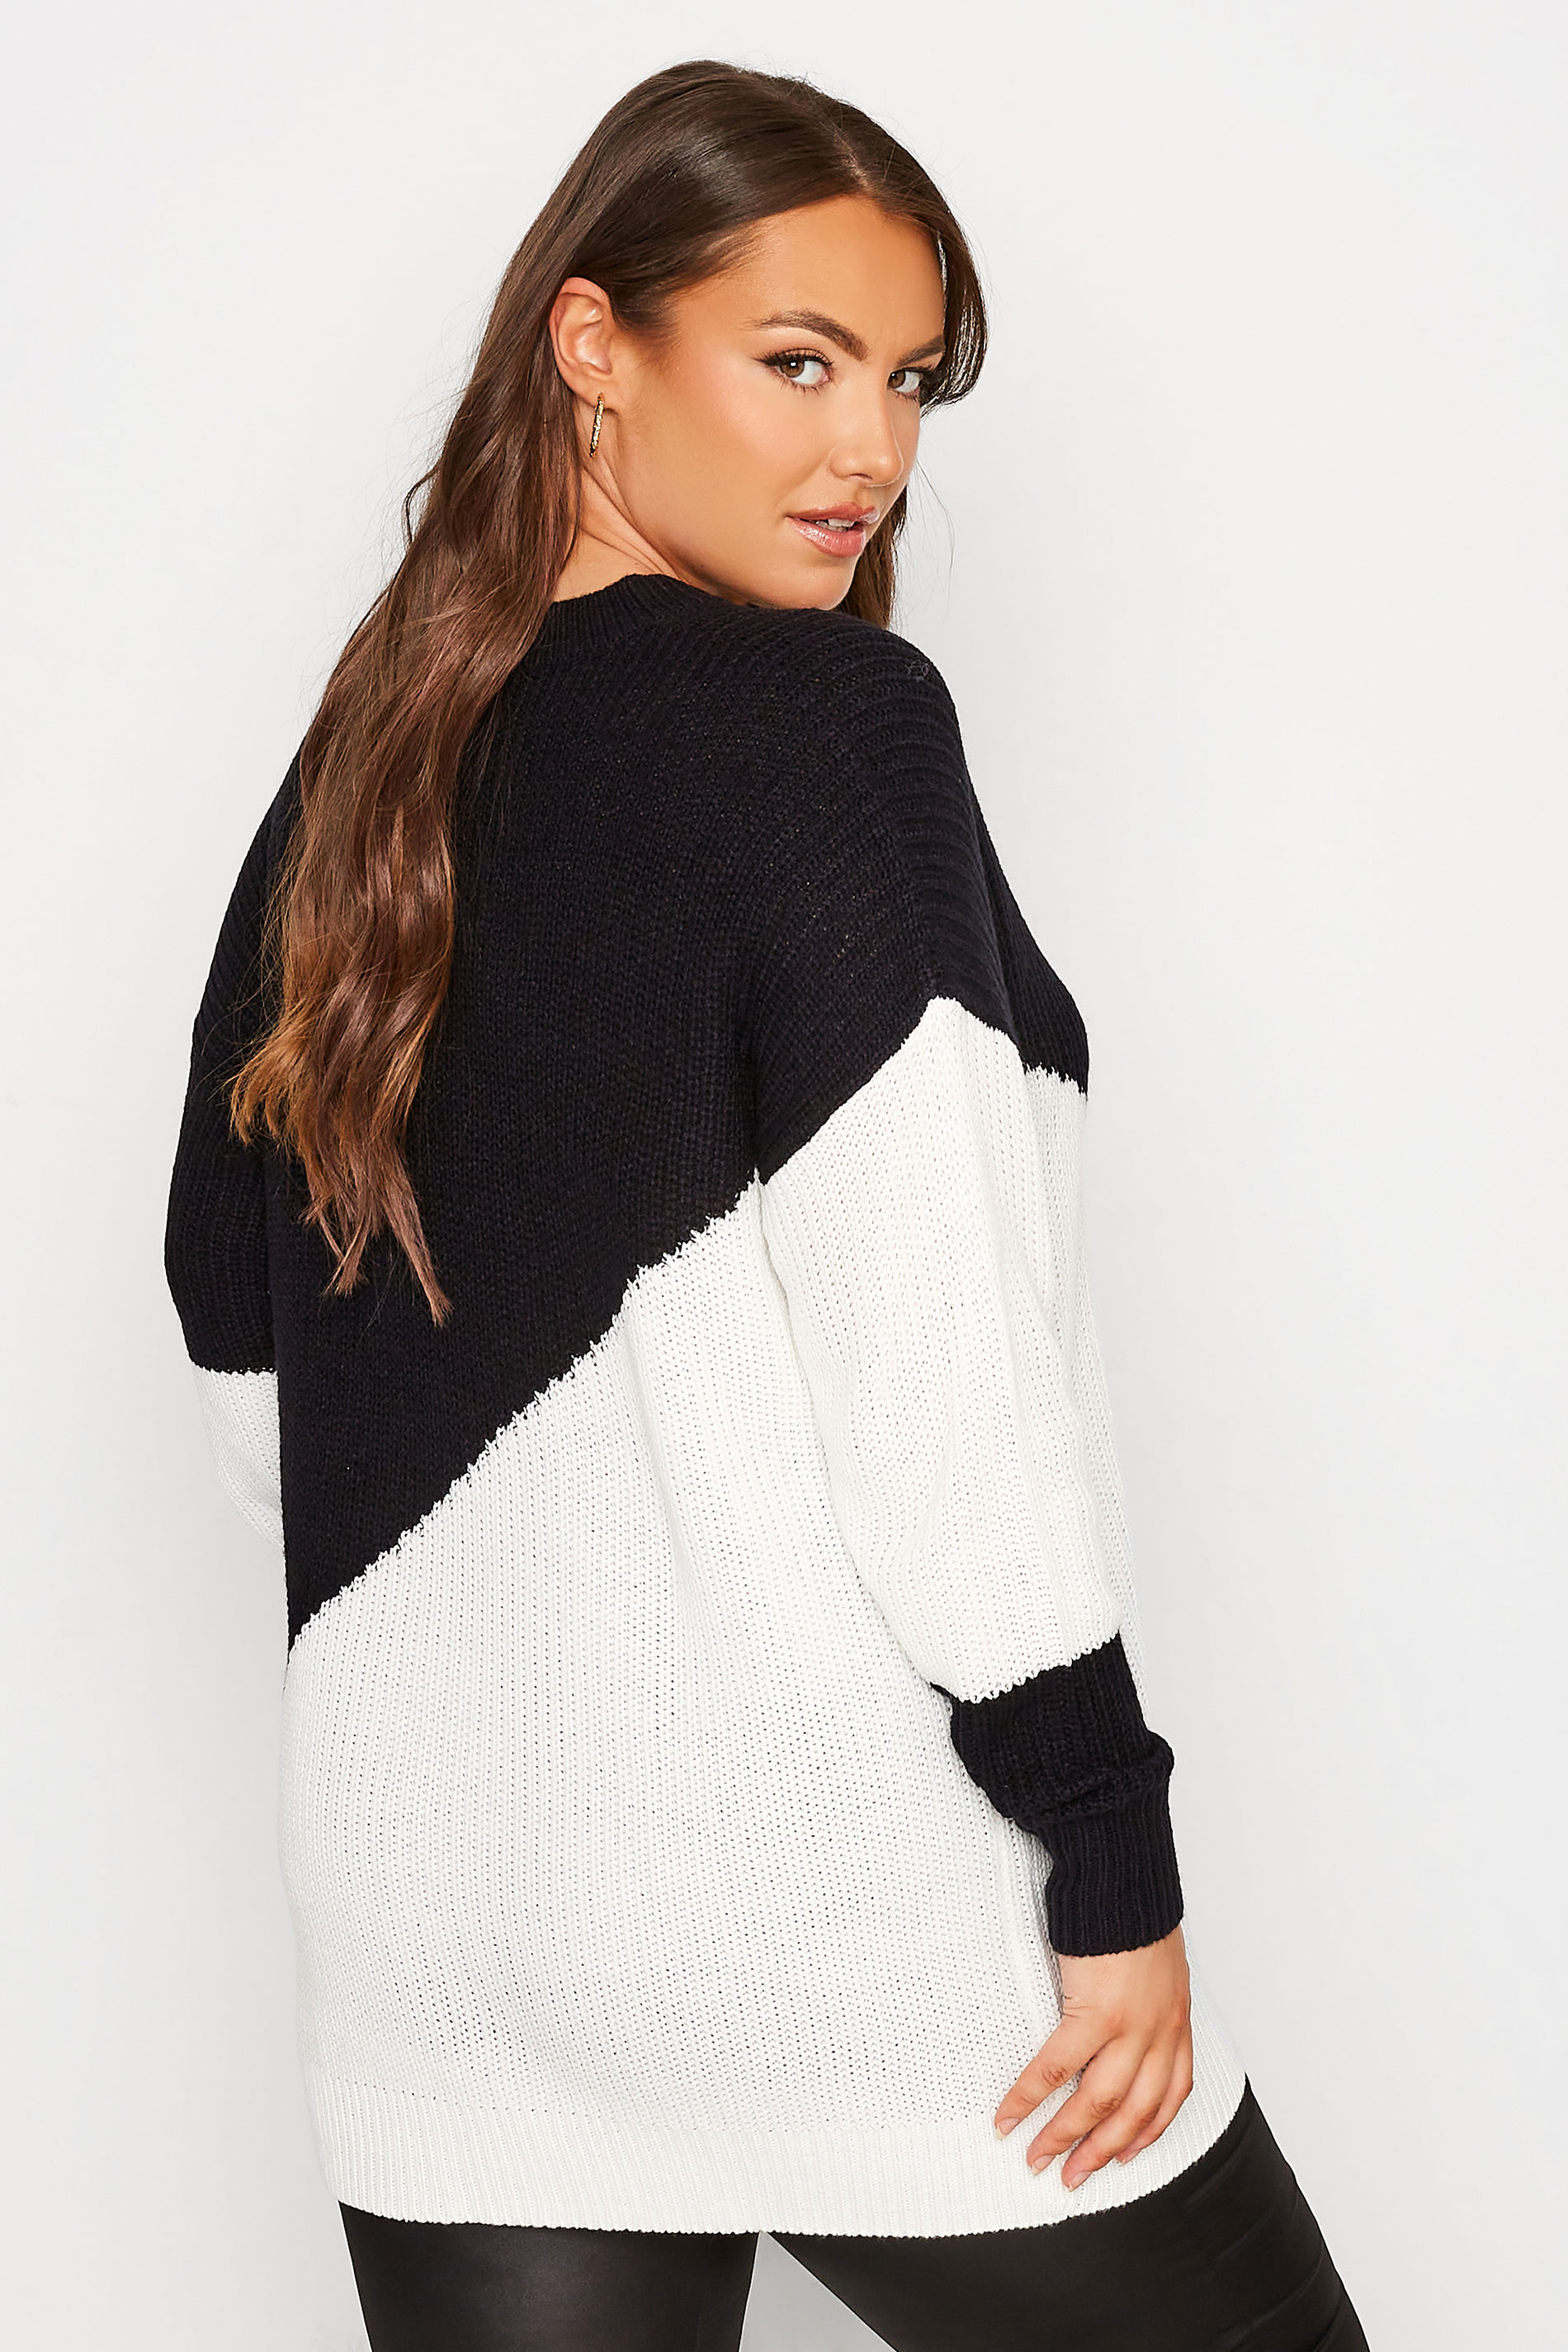 Plus Size Black & White Stripe Knitted Jumper | Yours Clothing 3